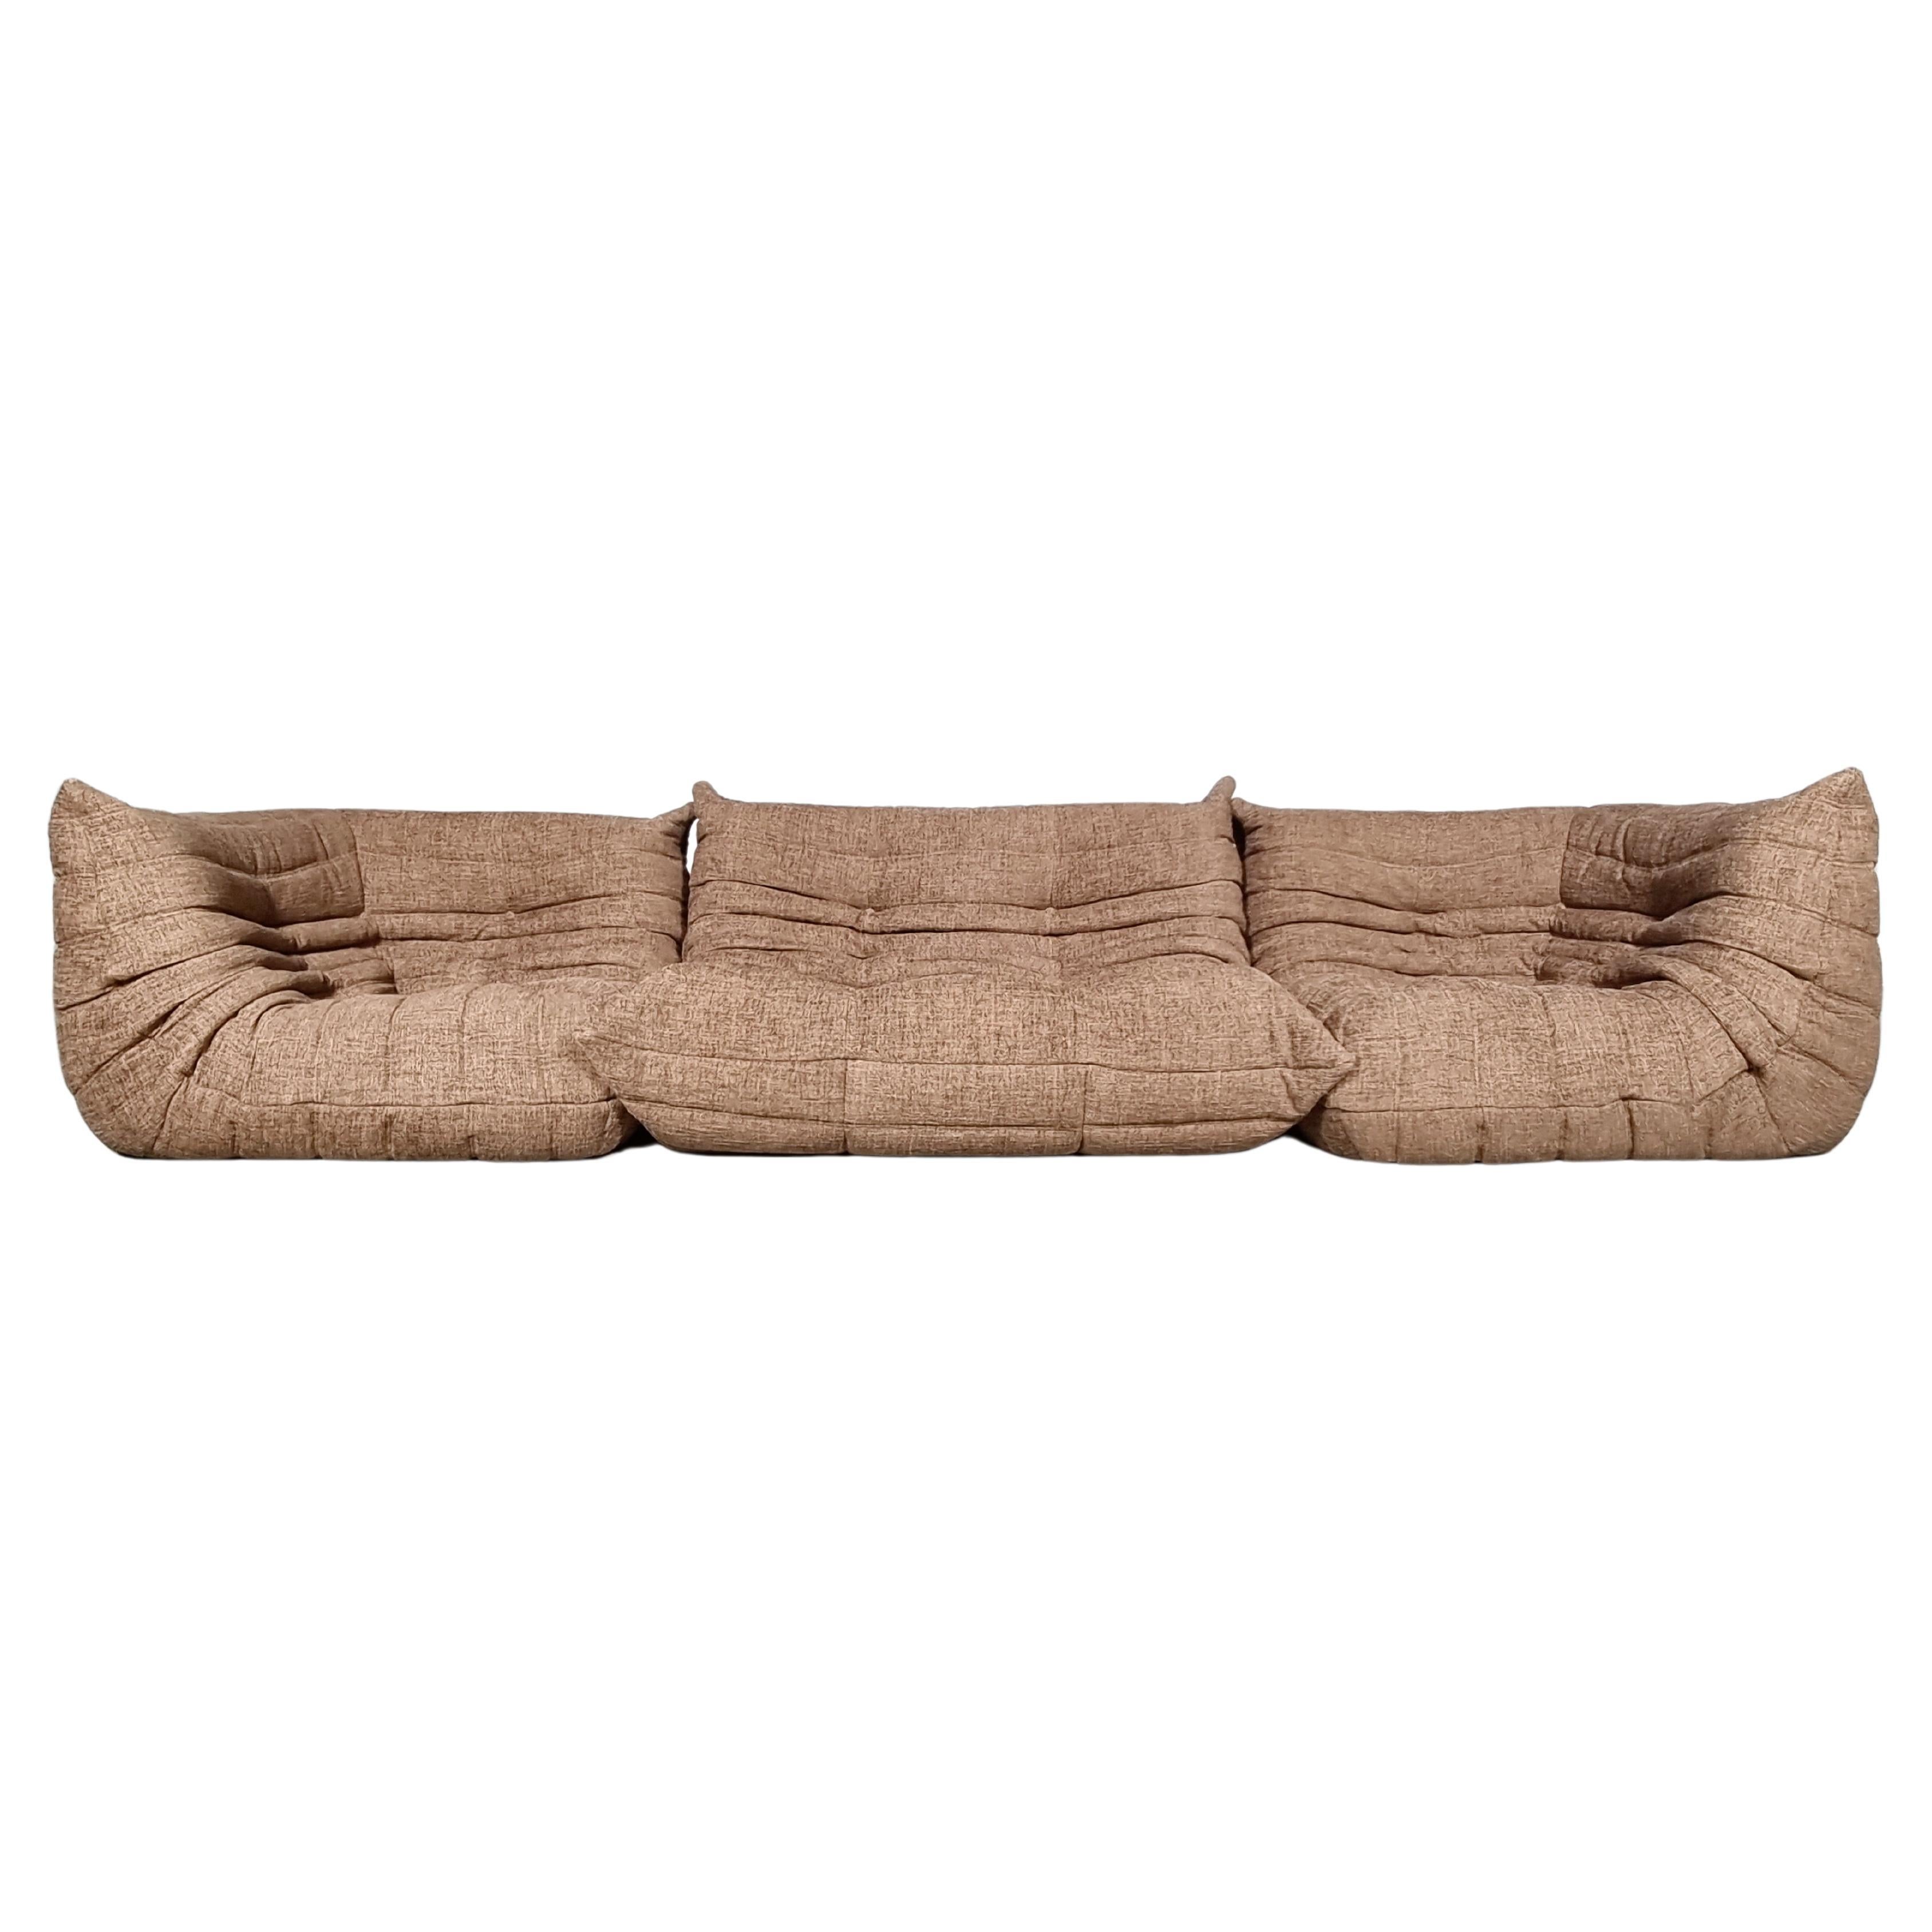 Togo 4-Seater Sectional Sofa by Michel Ducaroy for Ligne Roset, 1970s